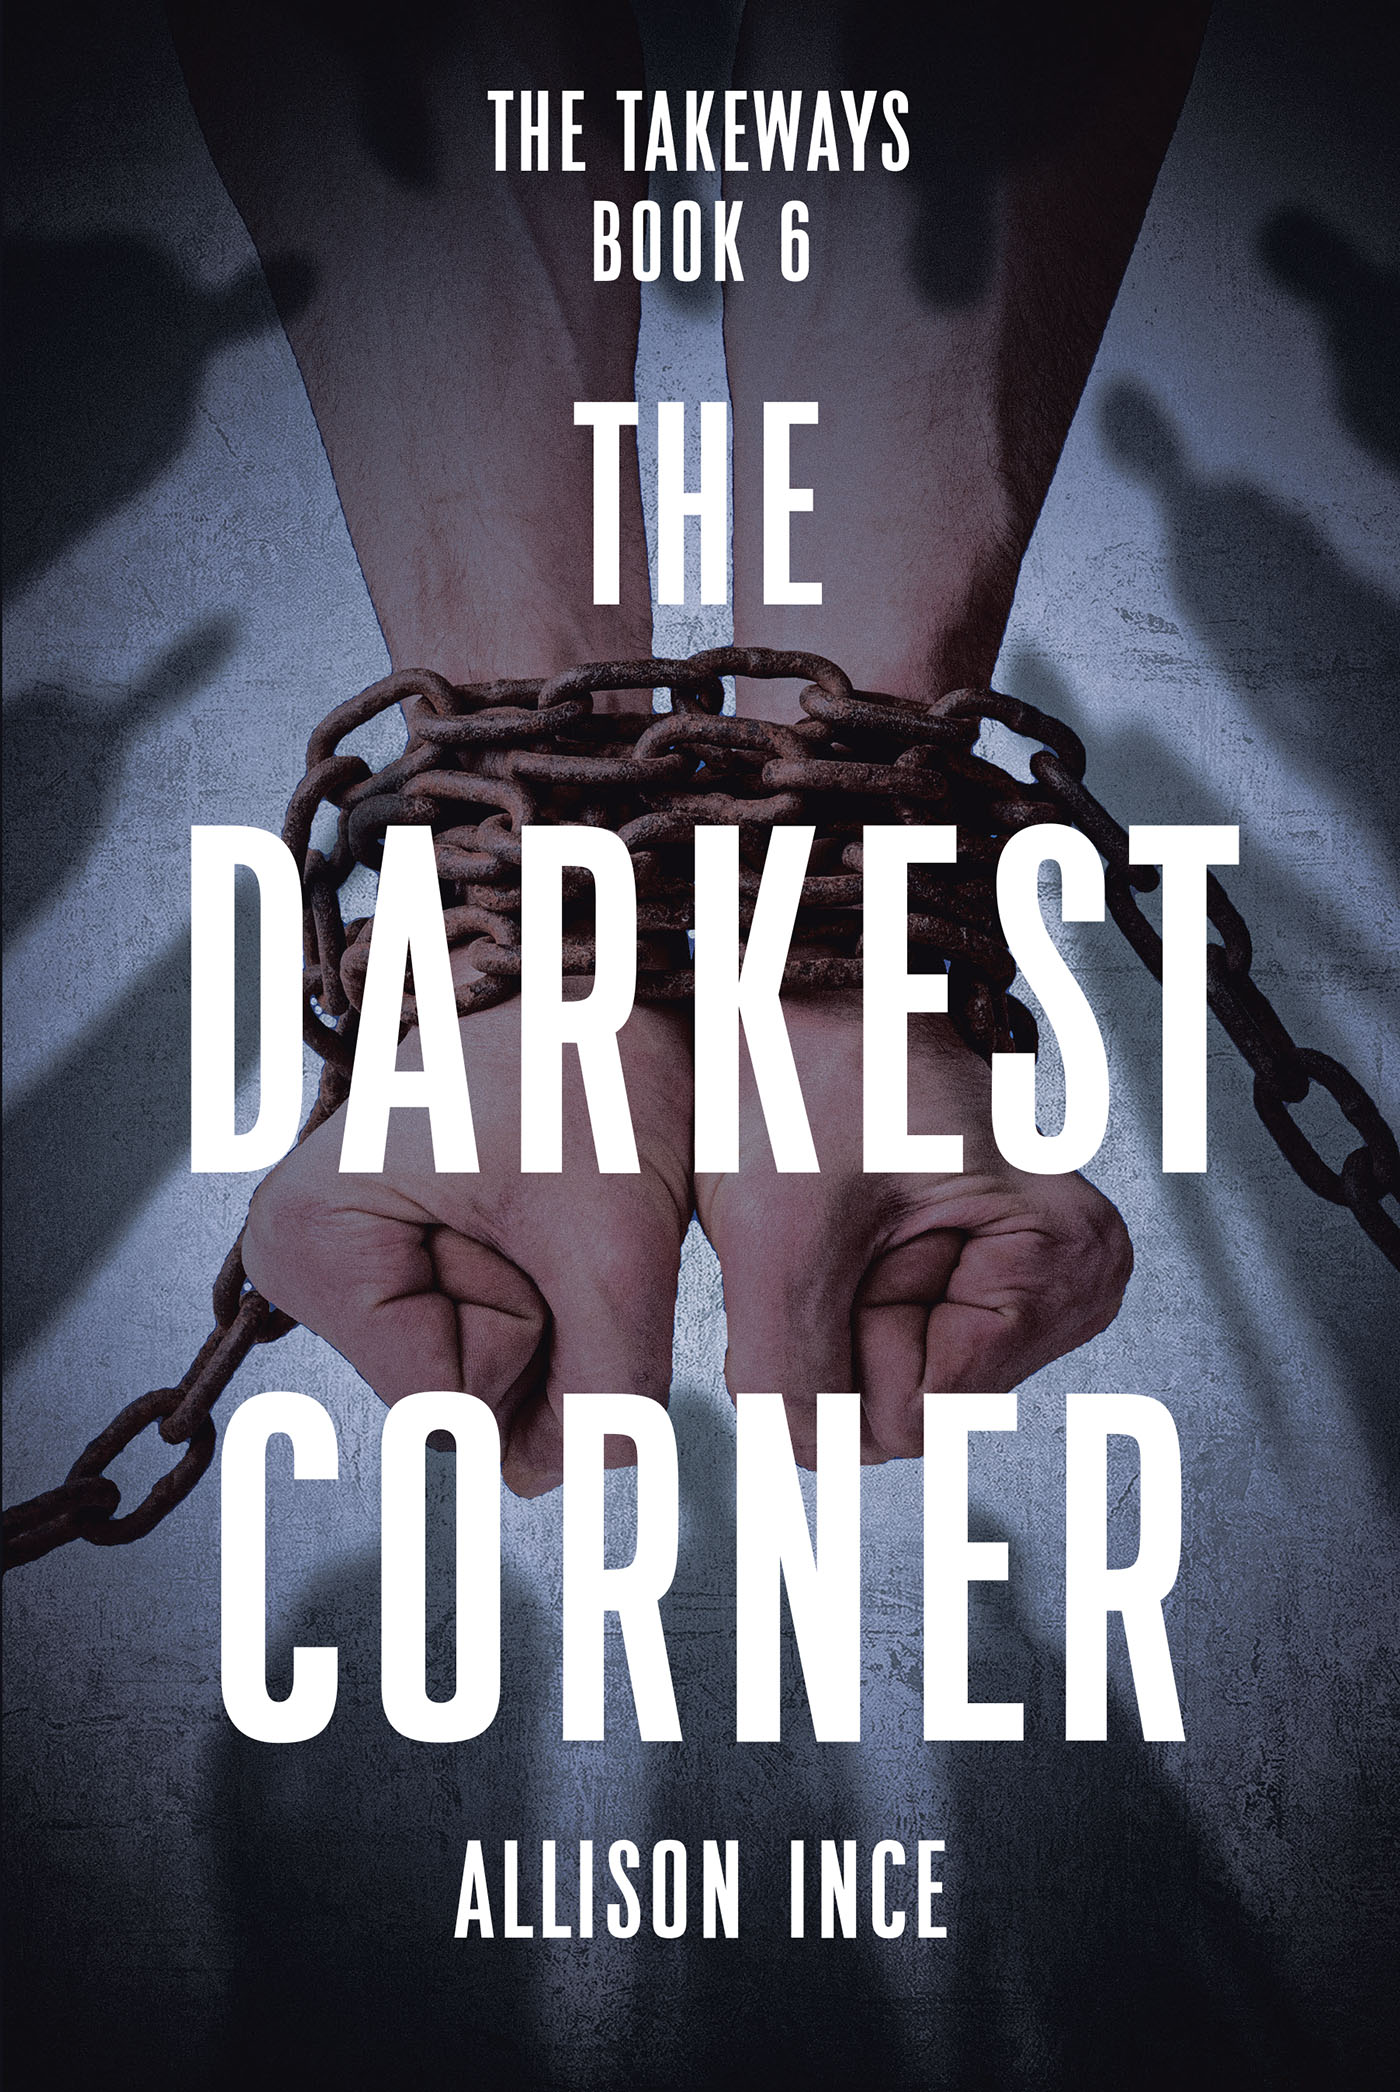 Allison Ince’s Newly Released "The Darkest Corner" is an Engrossing Continuation of an Action-Packed Apocalyptic Battle Against Evil